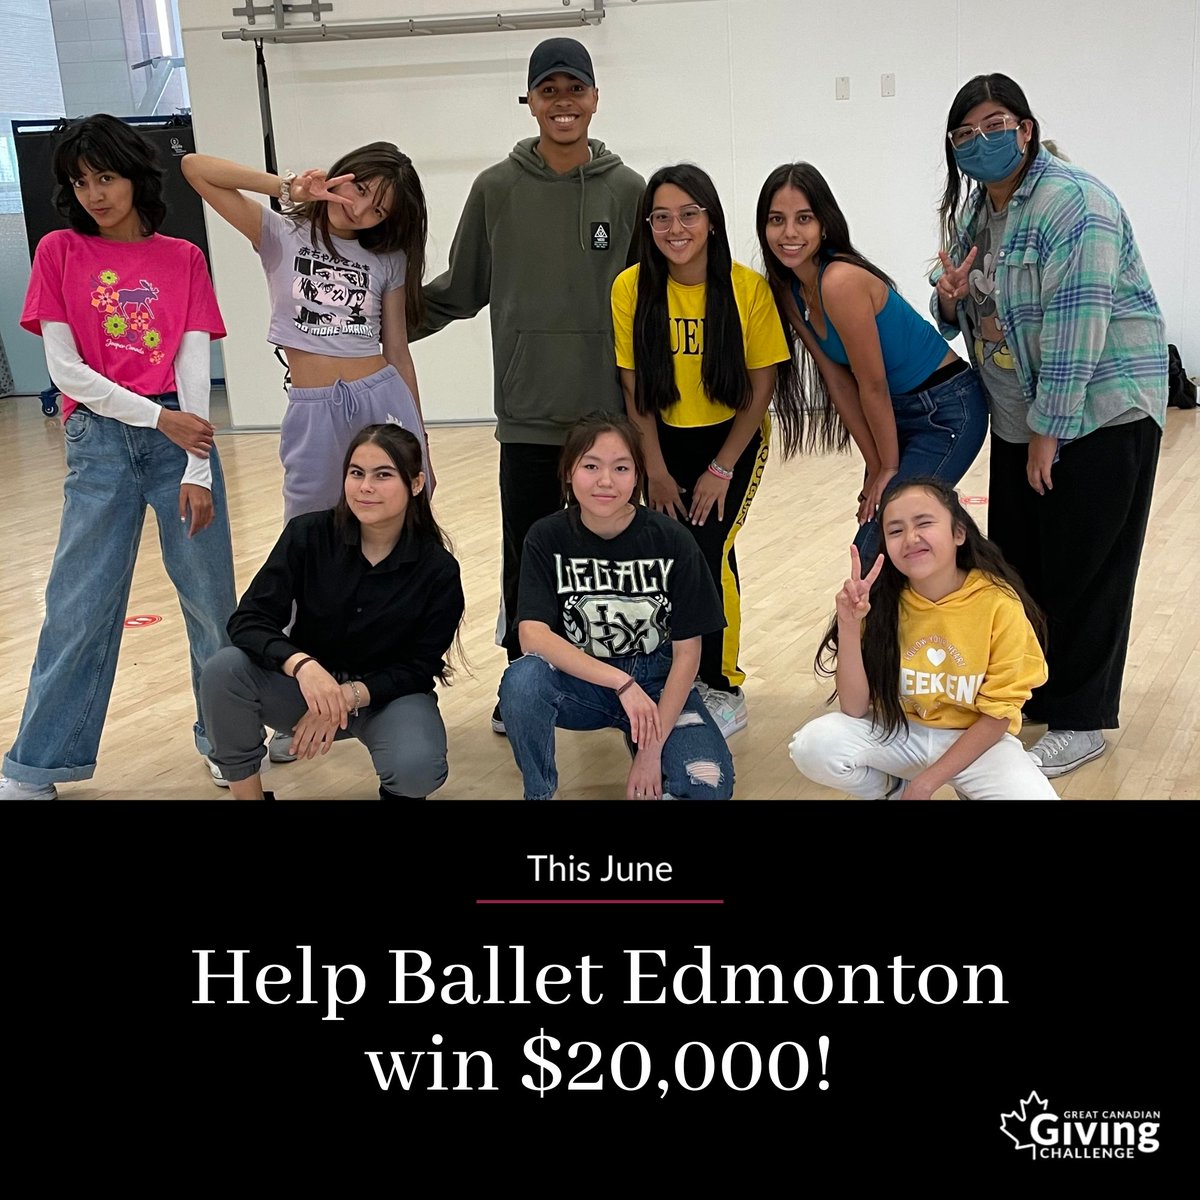 Every dollar donated to Ballet Edmonton through CanadaHelps by June 30th gives us a chance to win the grand prize of $20,000! Donate here: bit.ly/3CkyDt9
#givingchallengeca